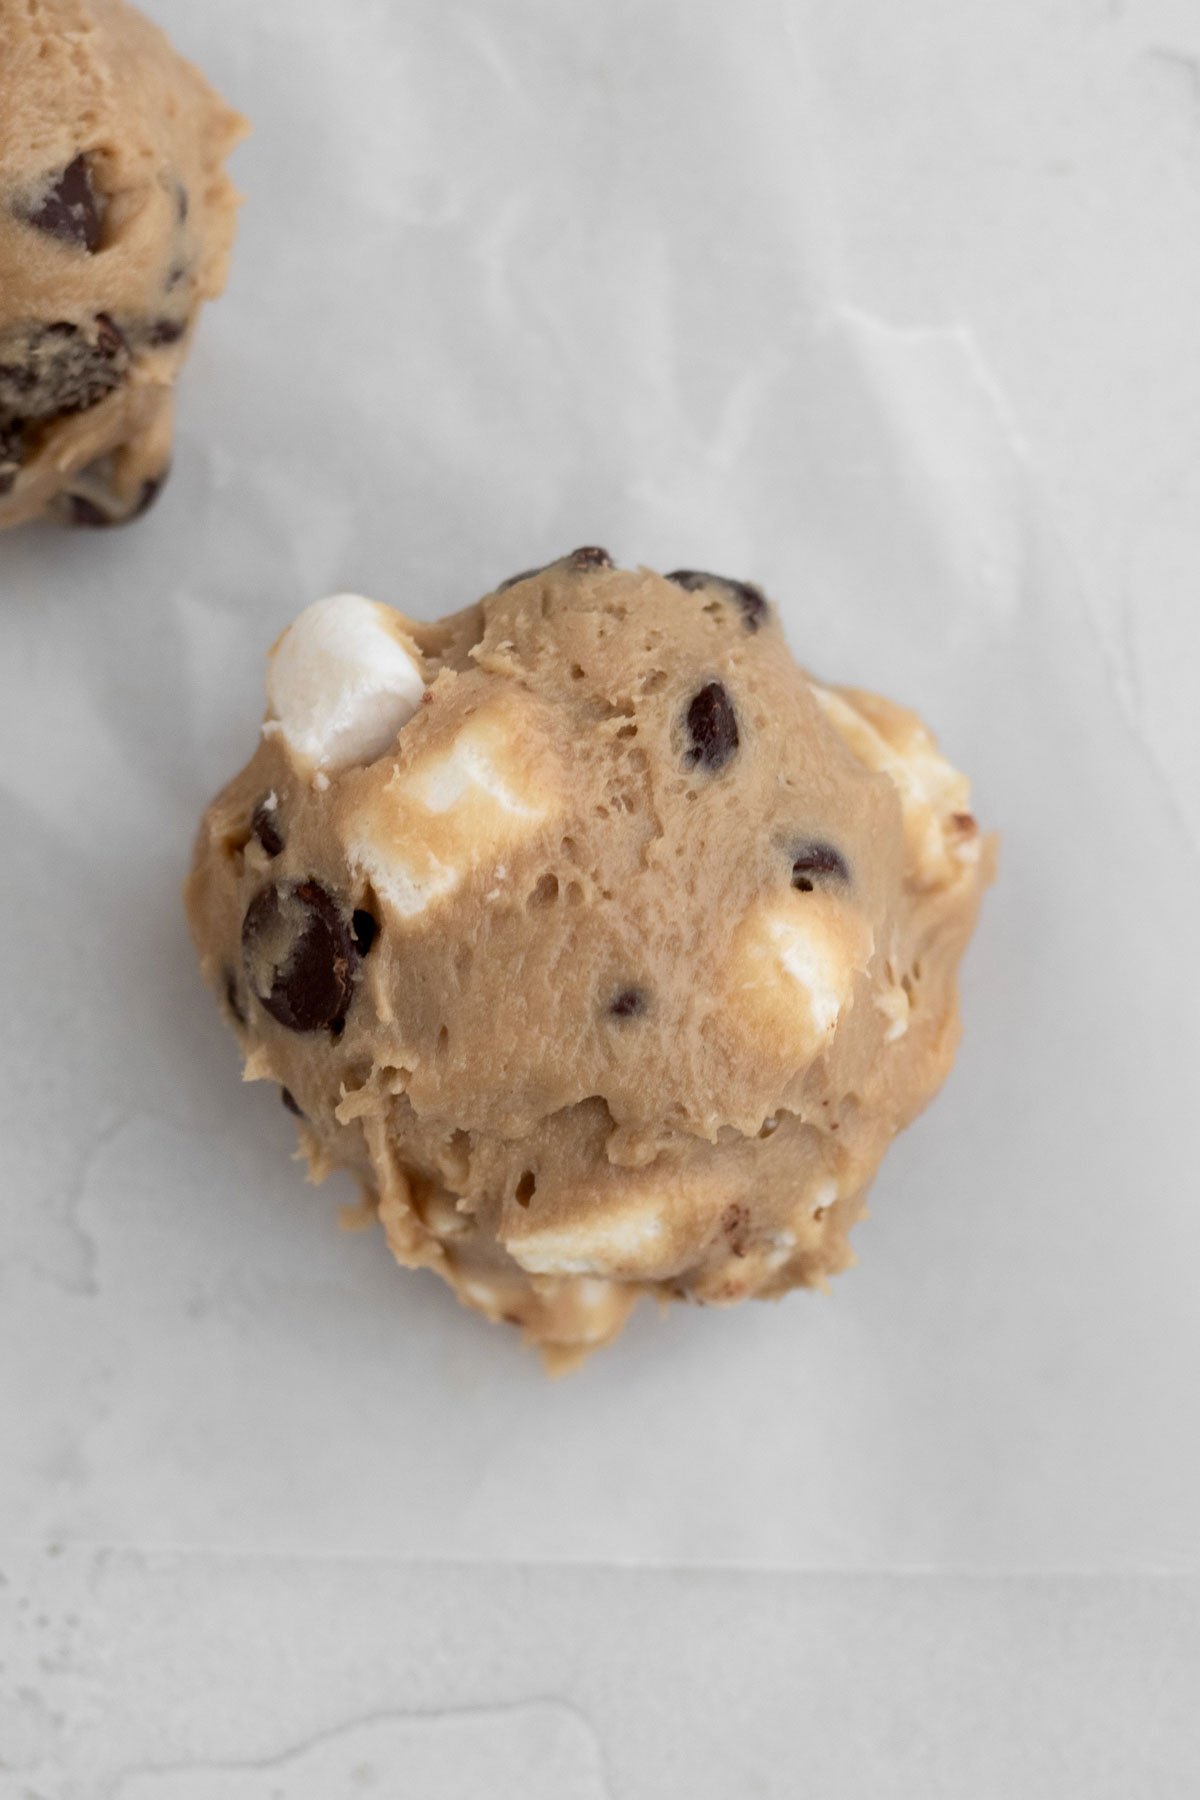 A scooped ball of chocolate chip marshmallow cookie dough,